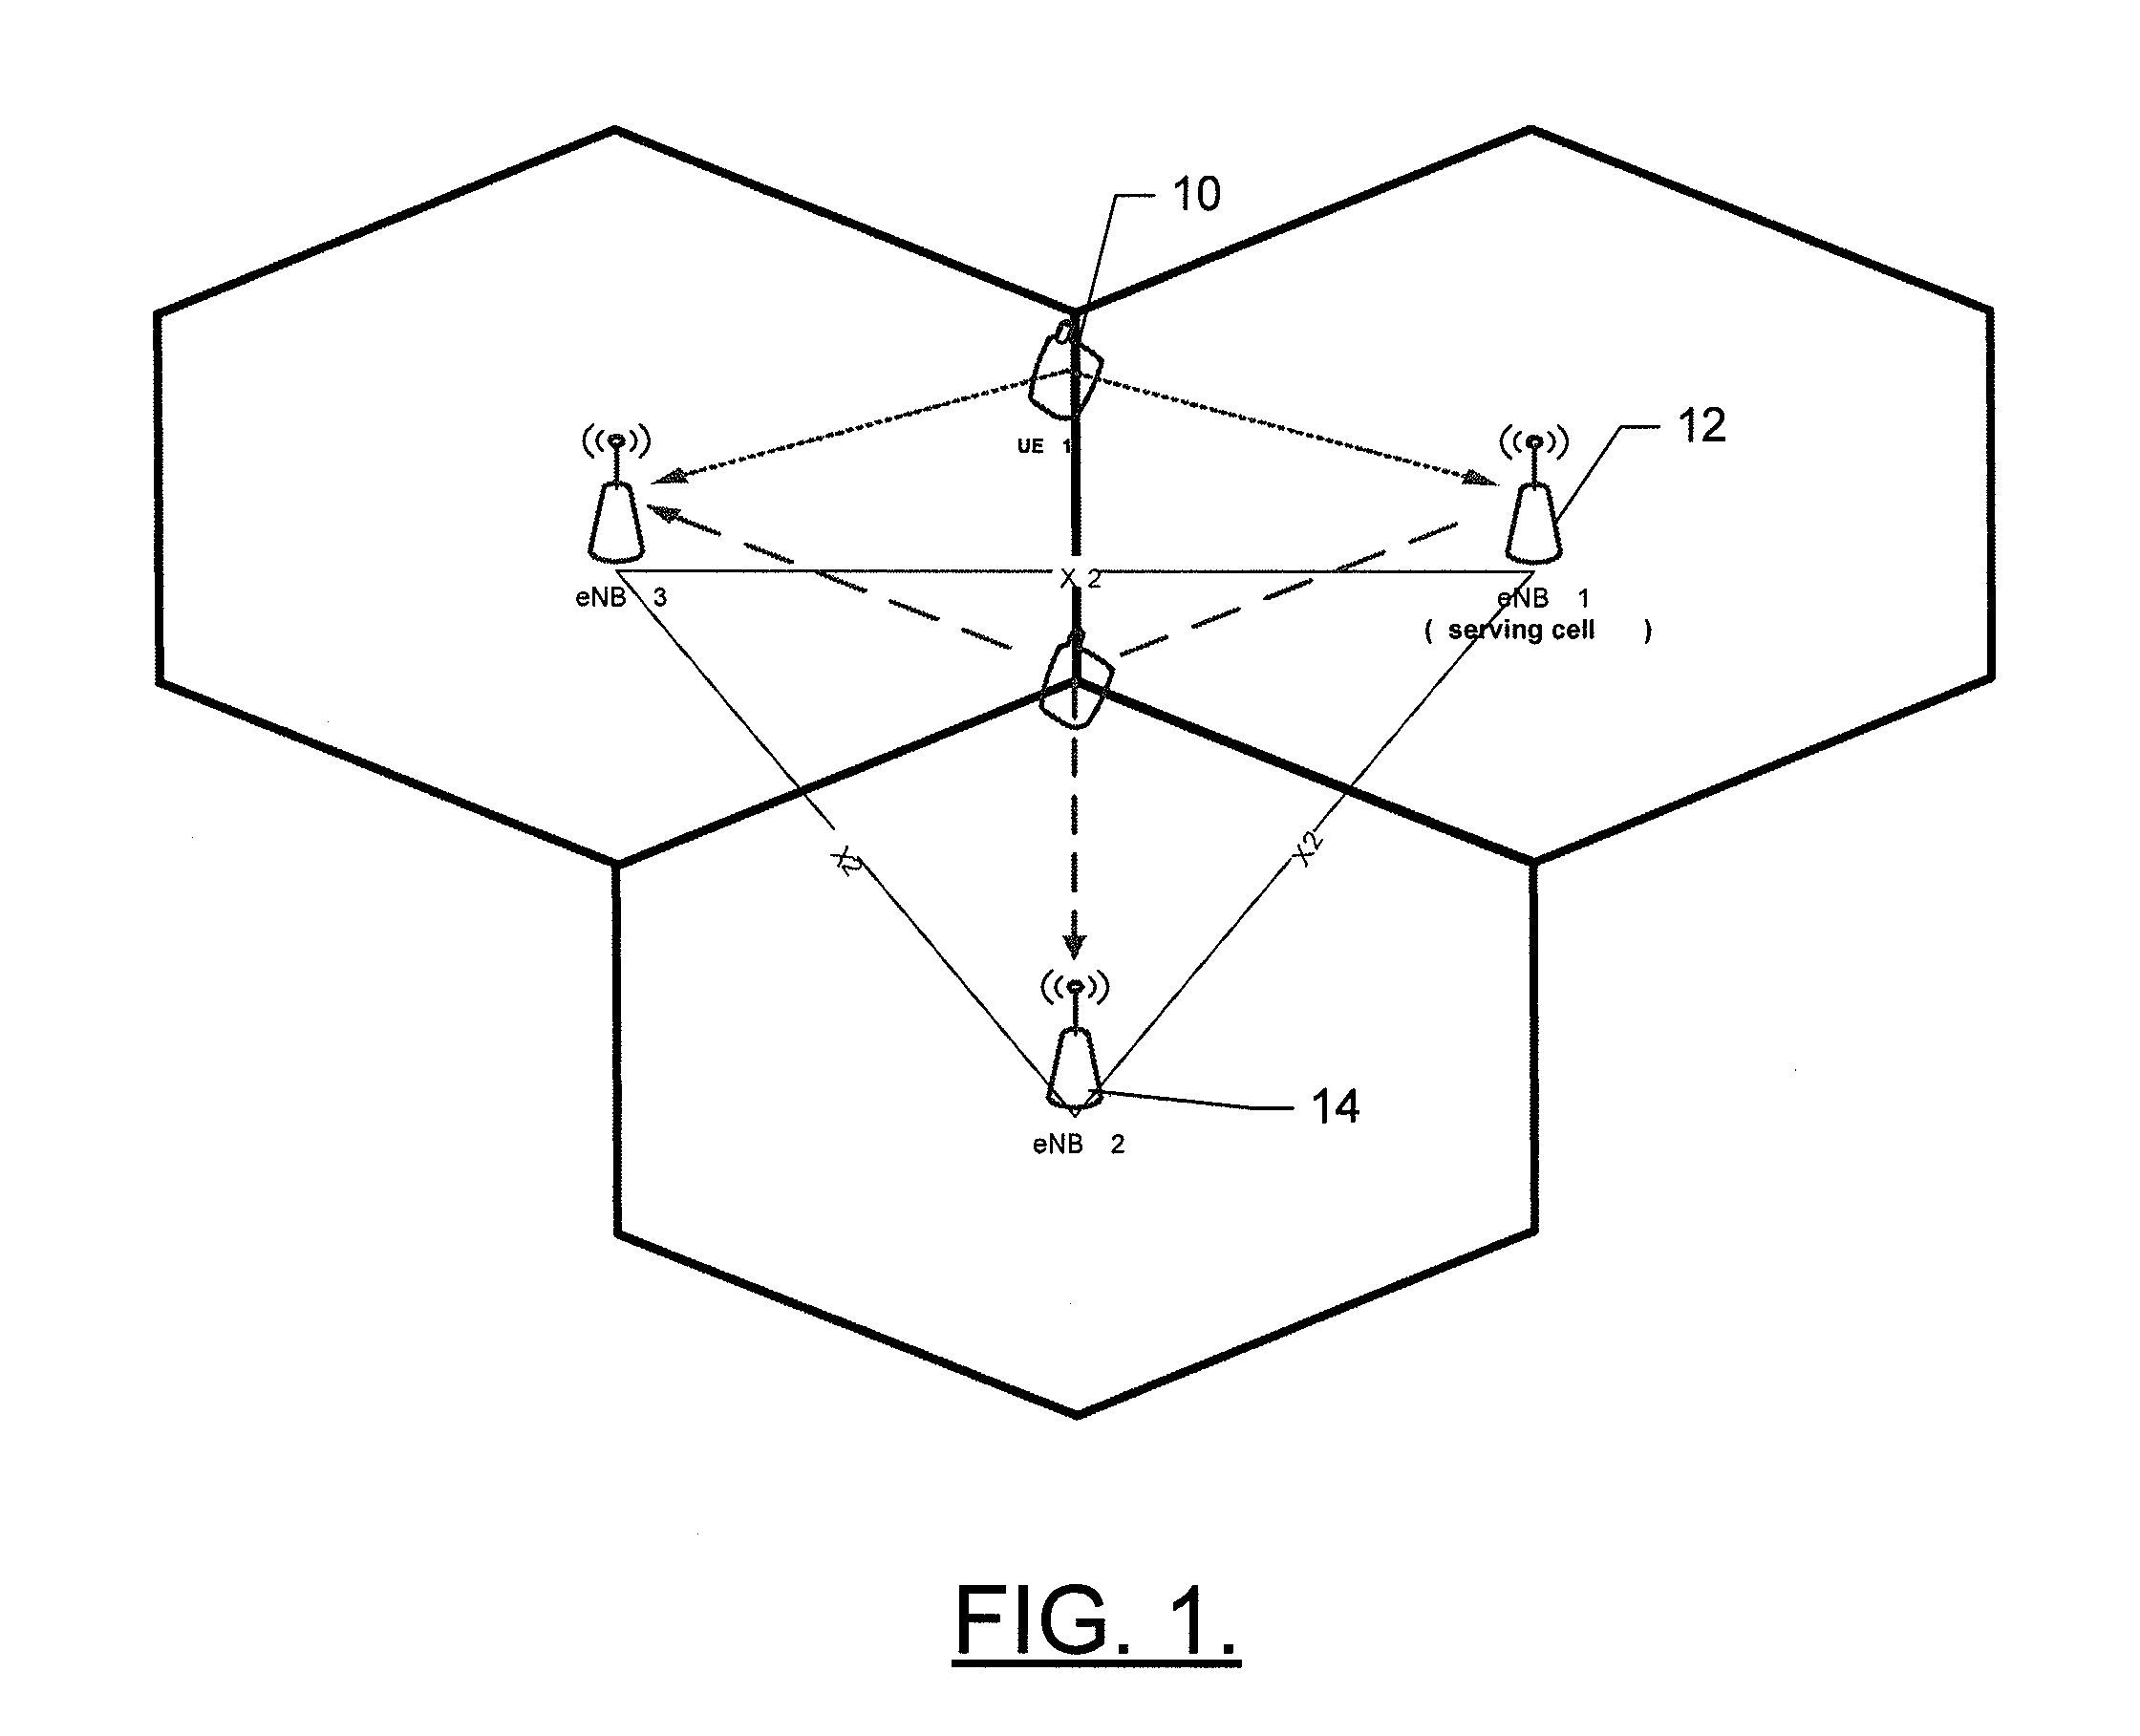 Method, apparatus and computer program product for interference avoidance in uplink coordinated multi-point reception